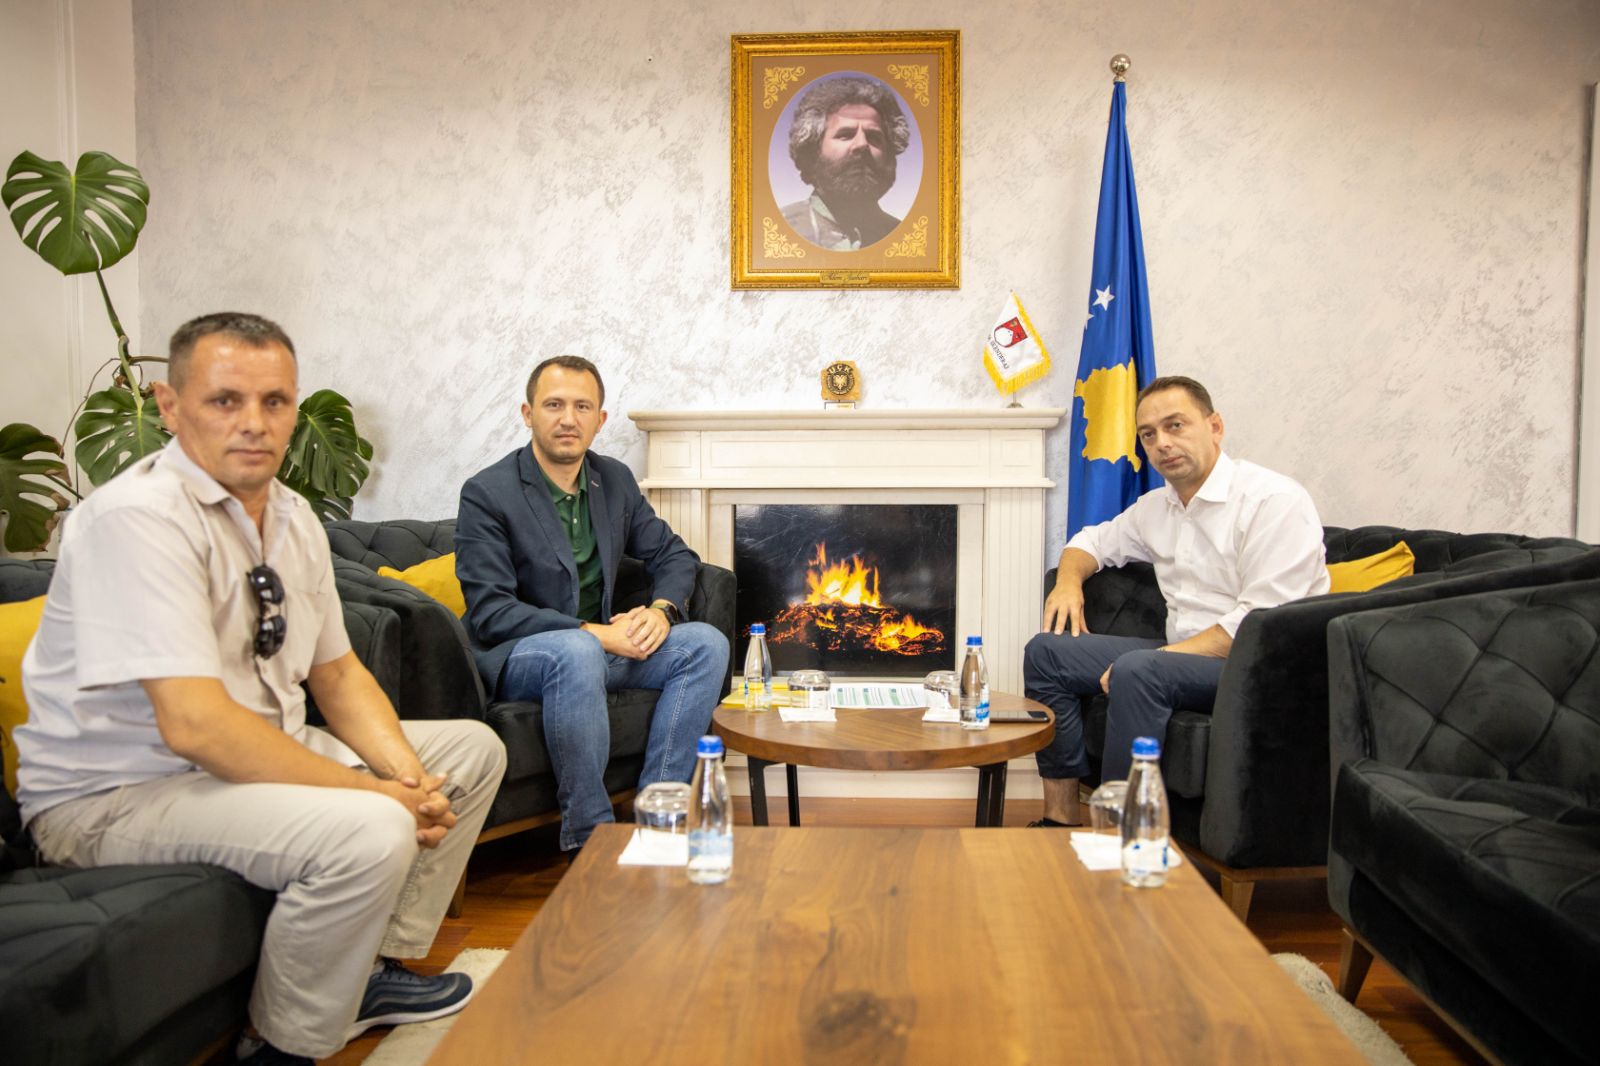 Democracy Plus meets with the Mayor of Skenderaj Fadil Nura to discuss the fulfillment of election commitments